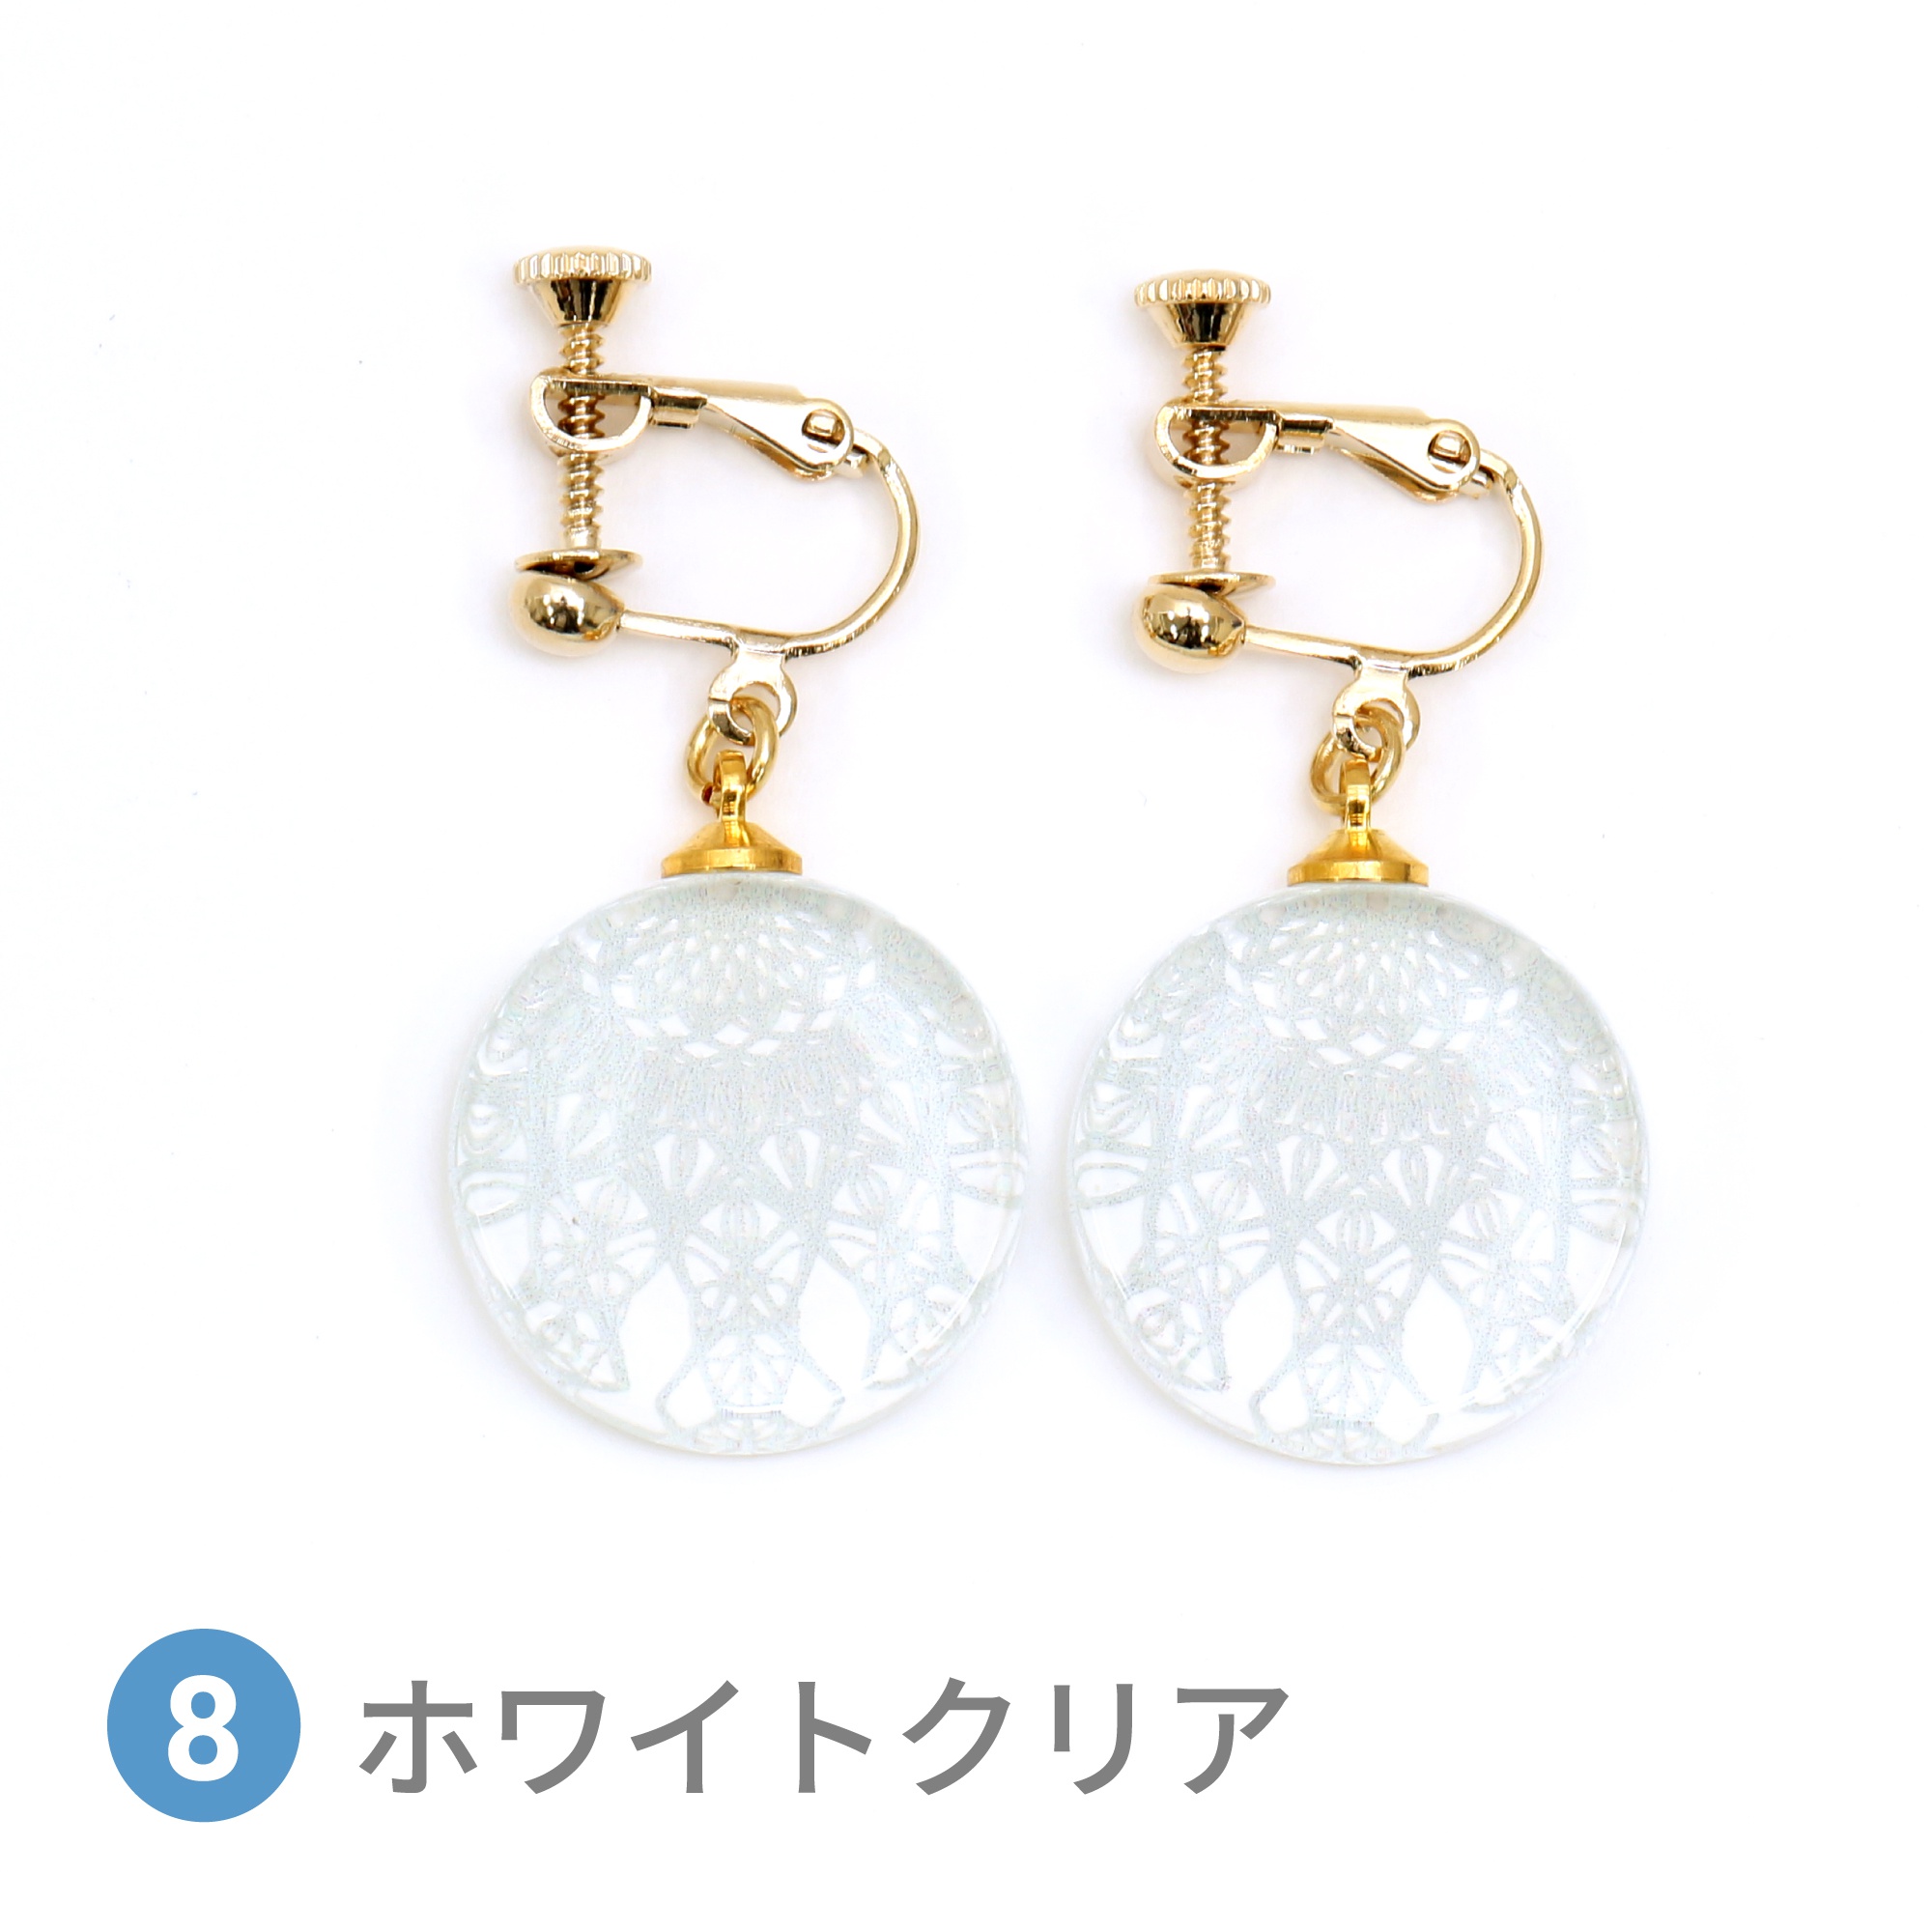 Glass accessories Earring LACE white clear round shape